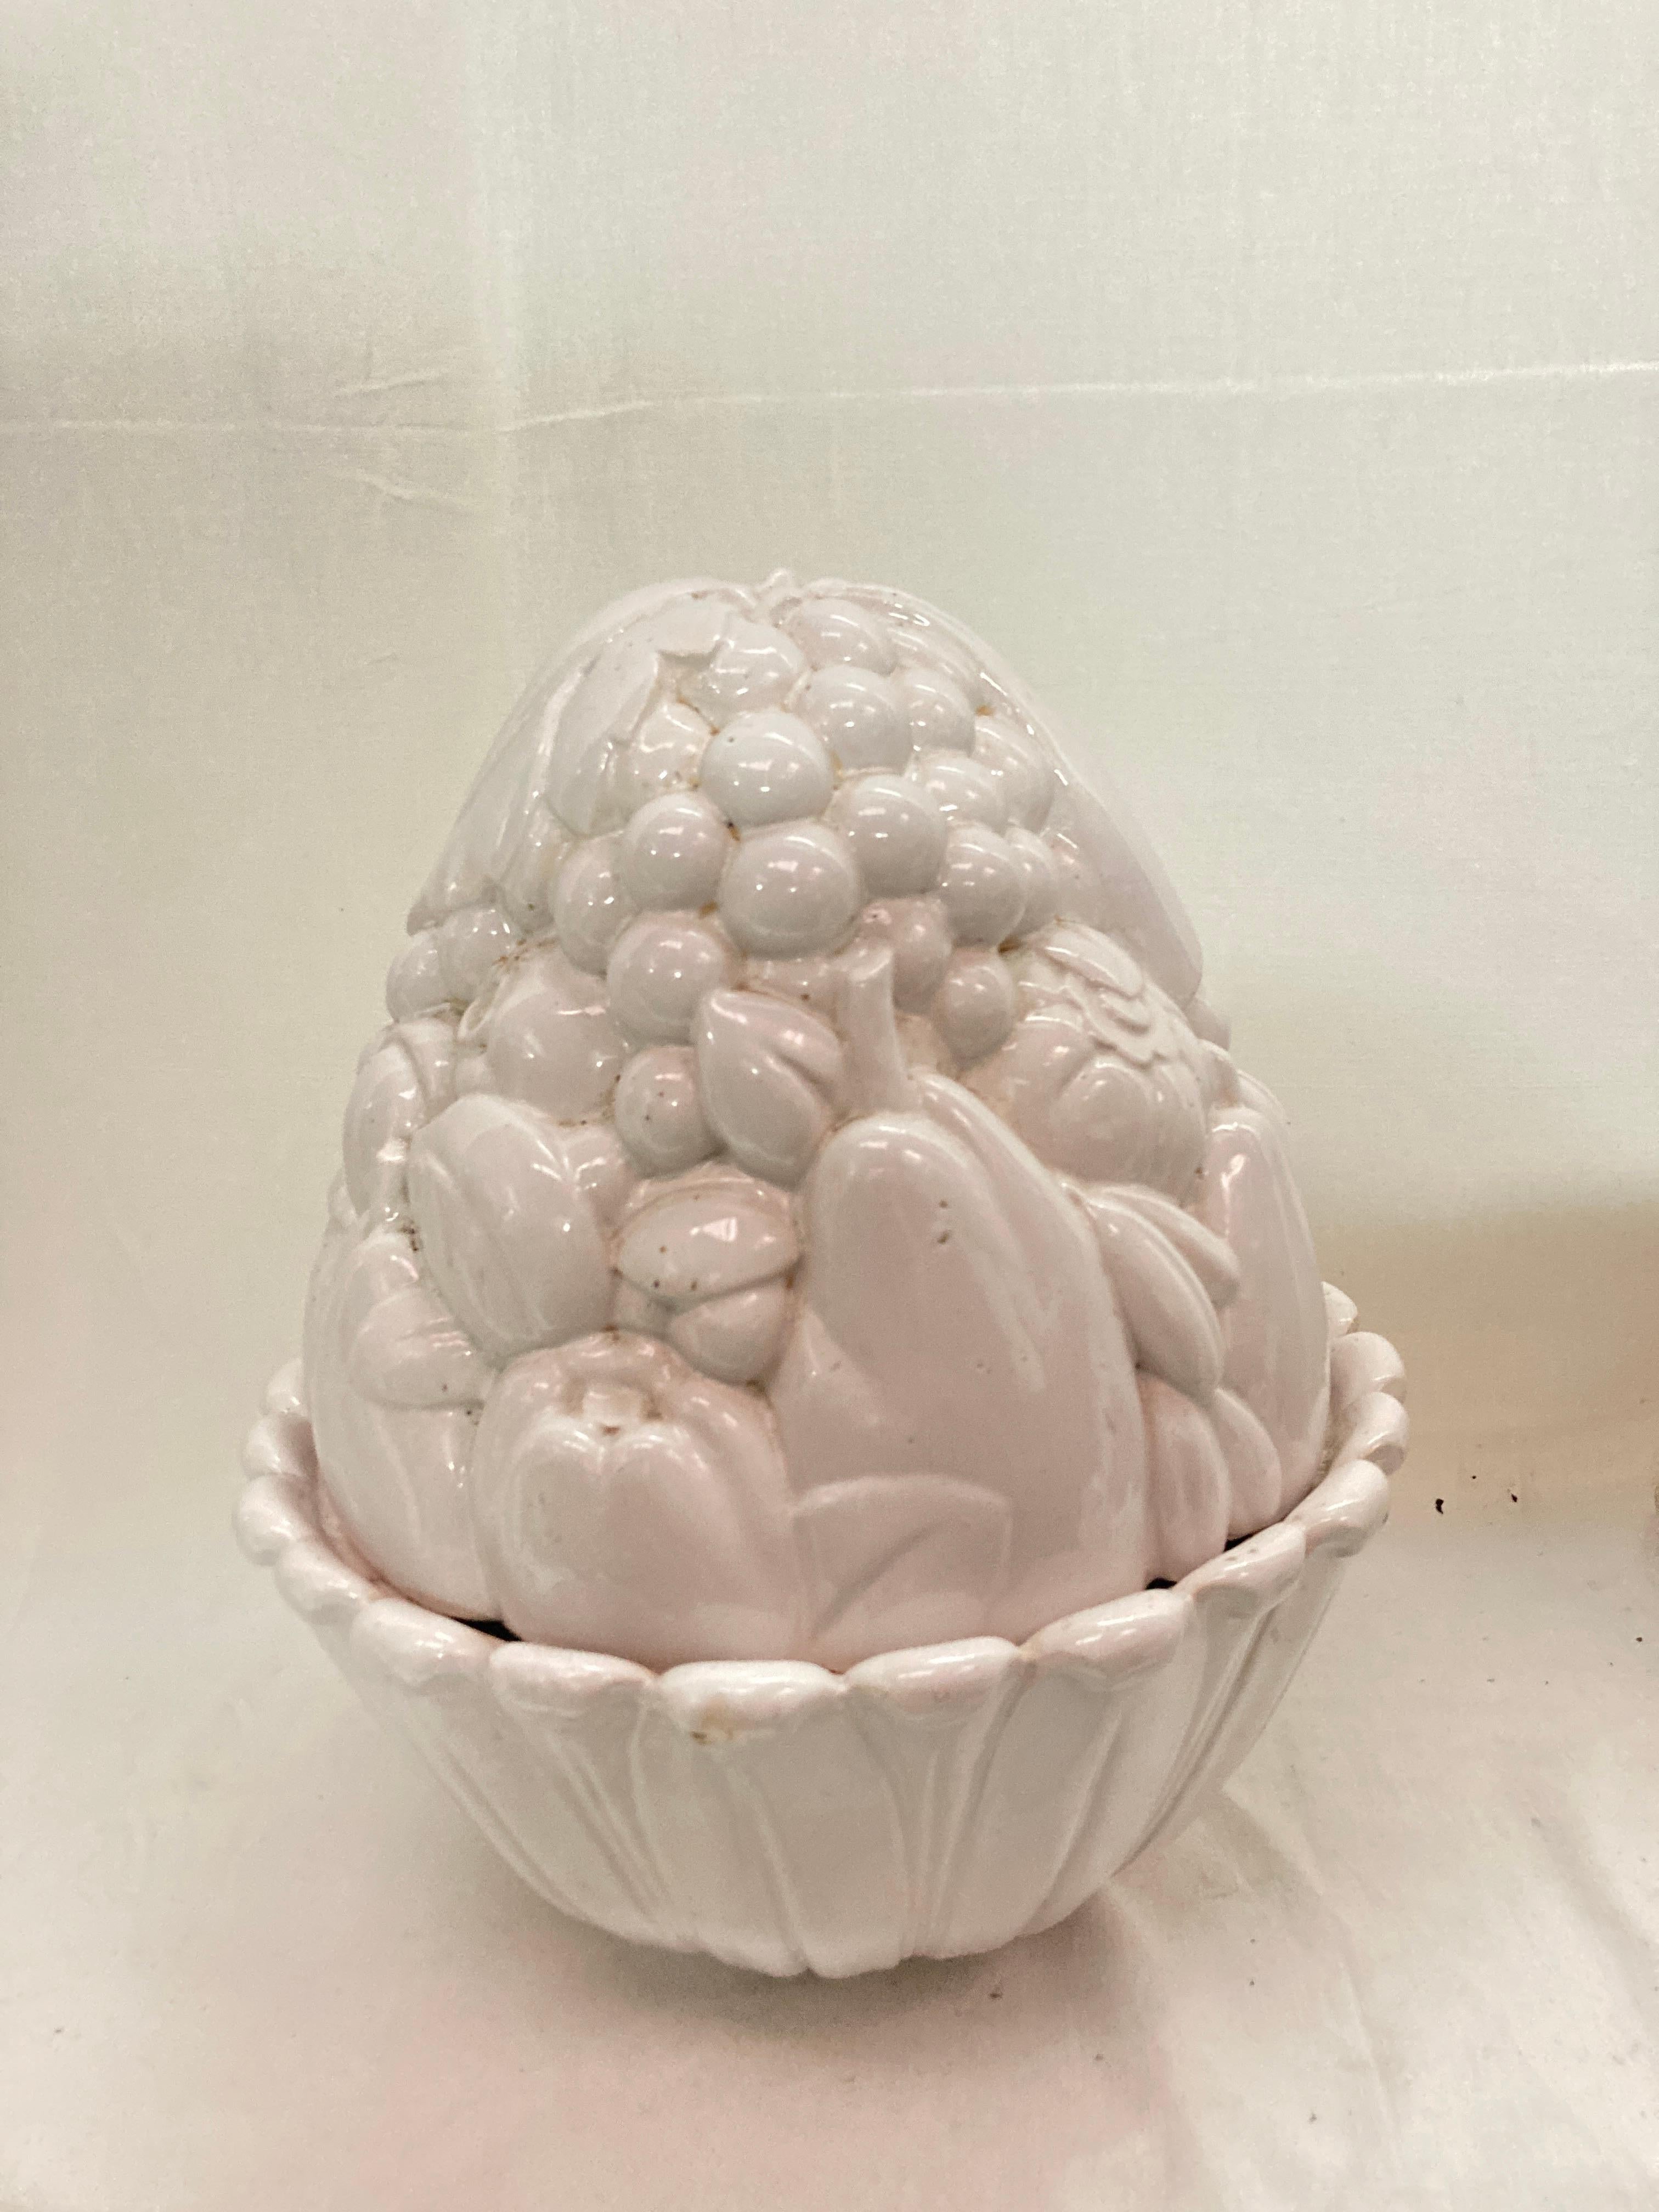 Rare center piece in white ceramic designed by Louis Sue and André Mare
Circa 1925's
Piece documented and located in plenty museums
